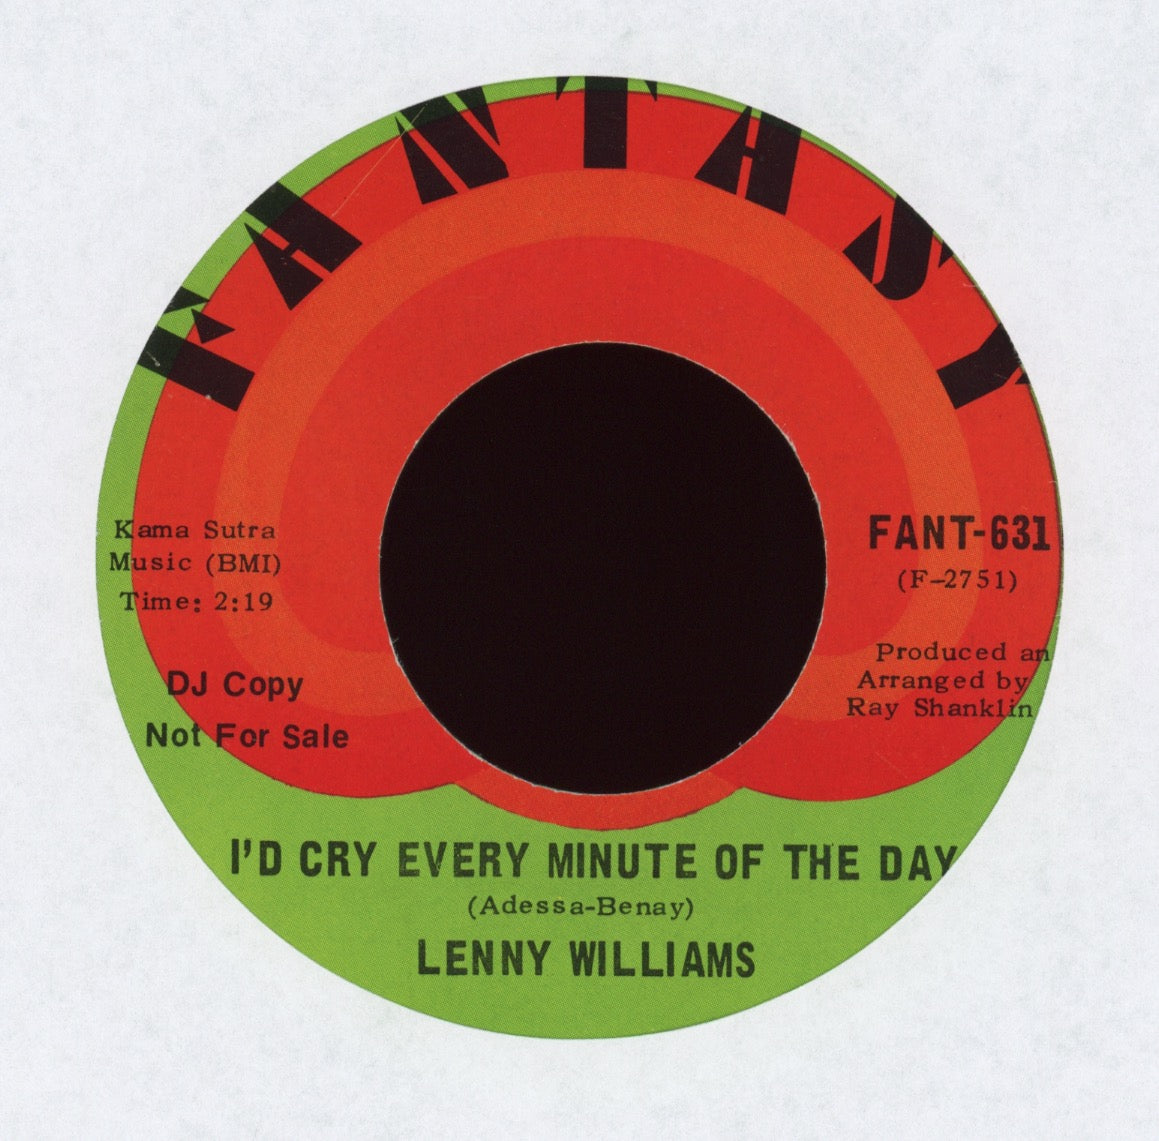 Lenny Williams - I'd Cry Every Minute Of The Day on Fantasy Promo